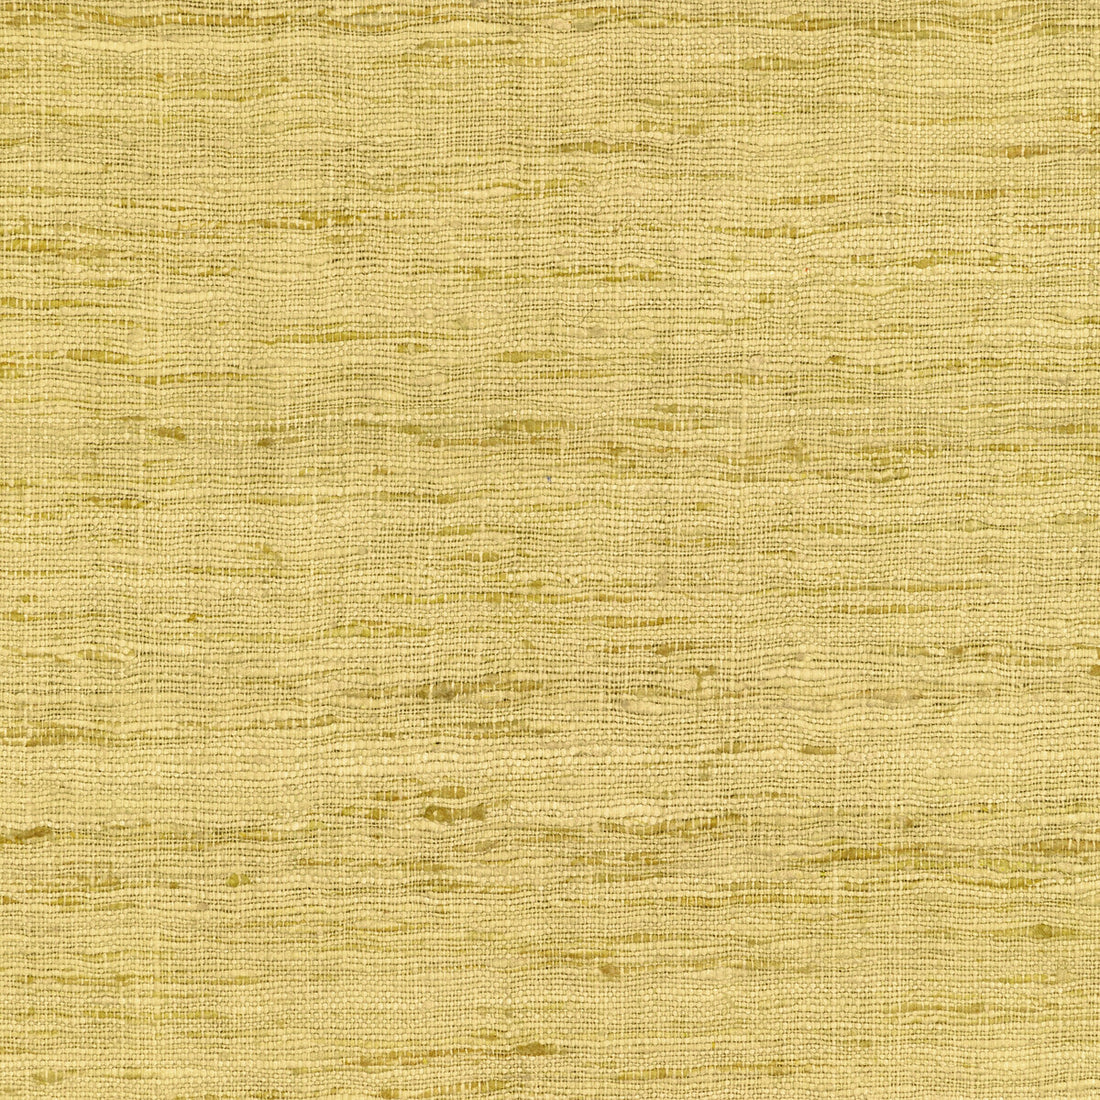 Sonoma fabric in citrona color - pattern GWF-3109.40.0 - by Lee Jofa Modern in the Kelly Wearstler VI collection